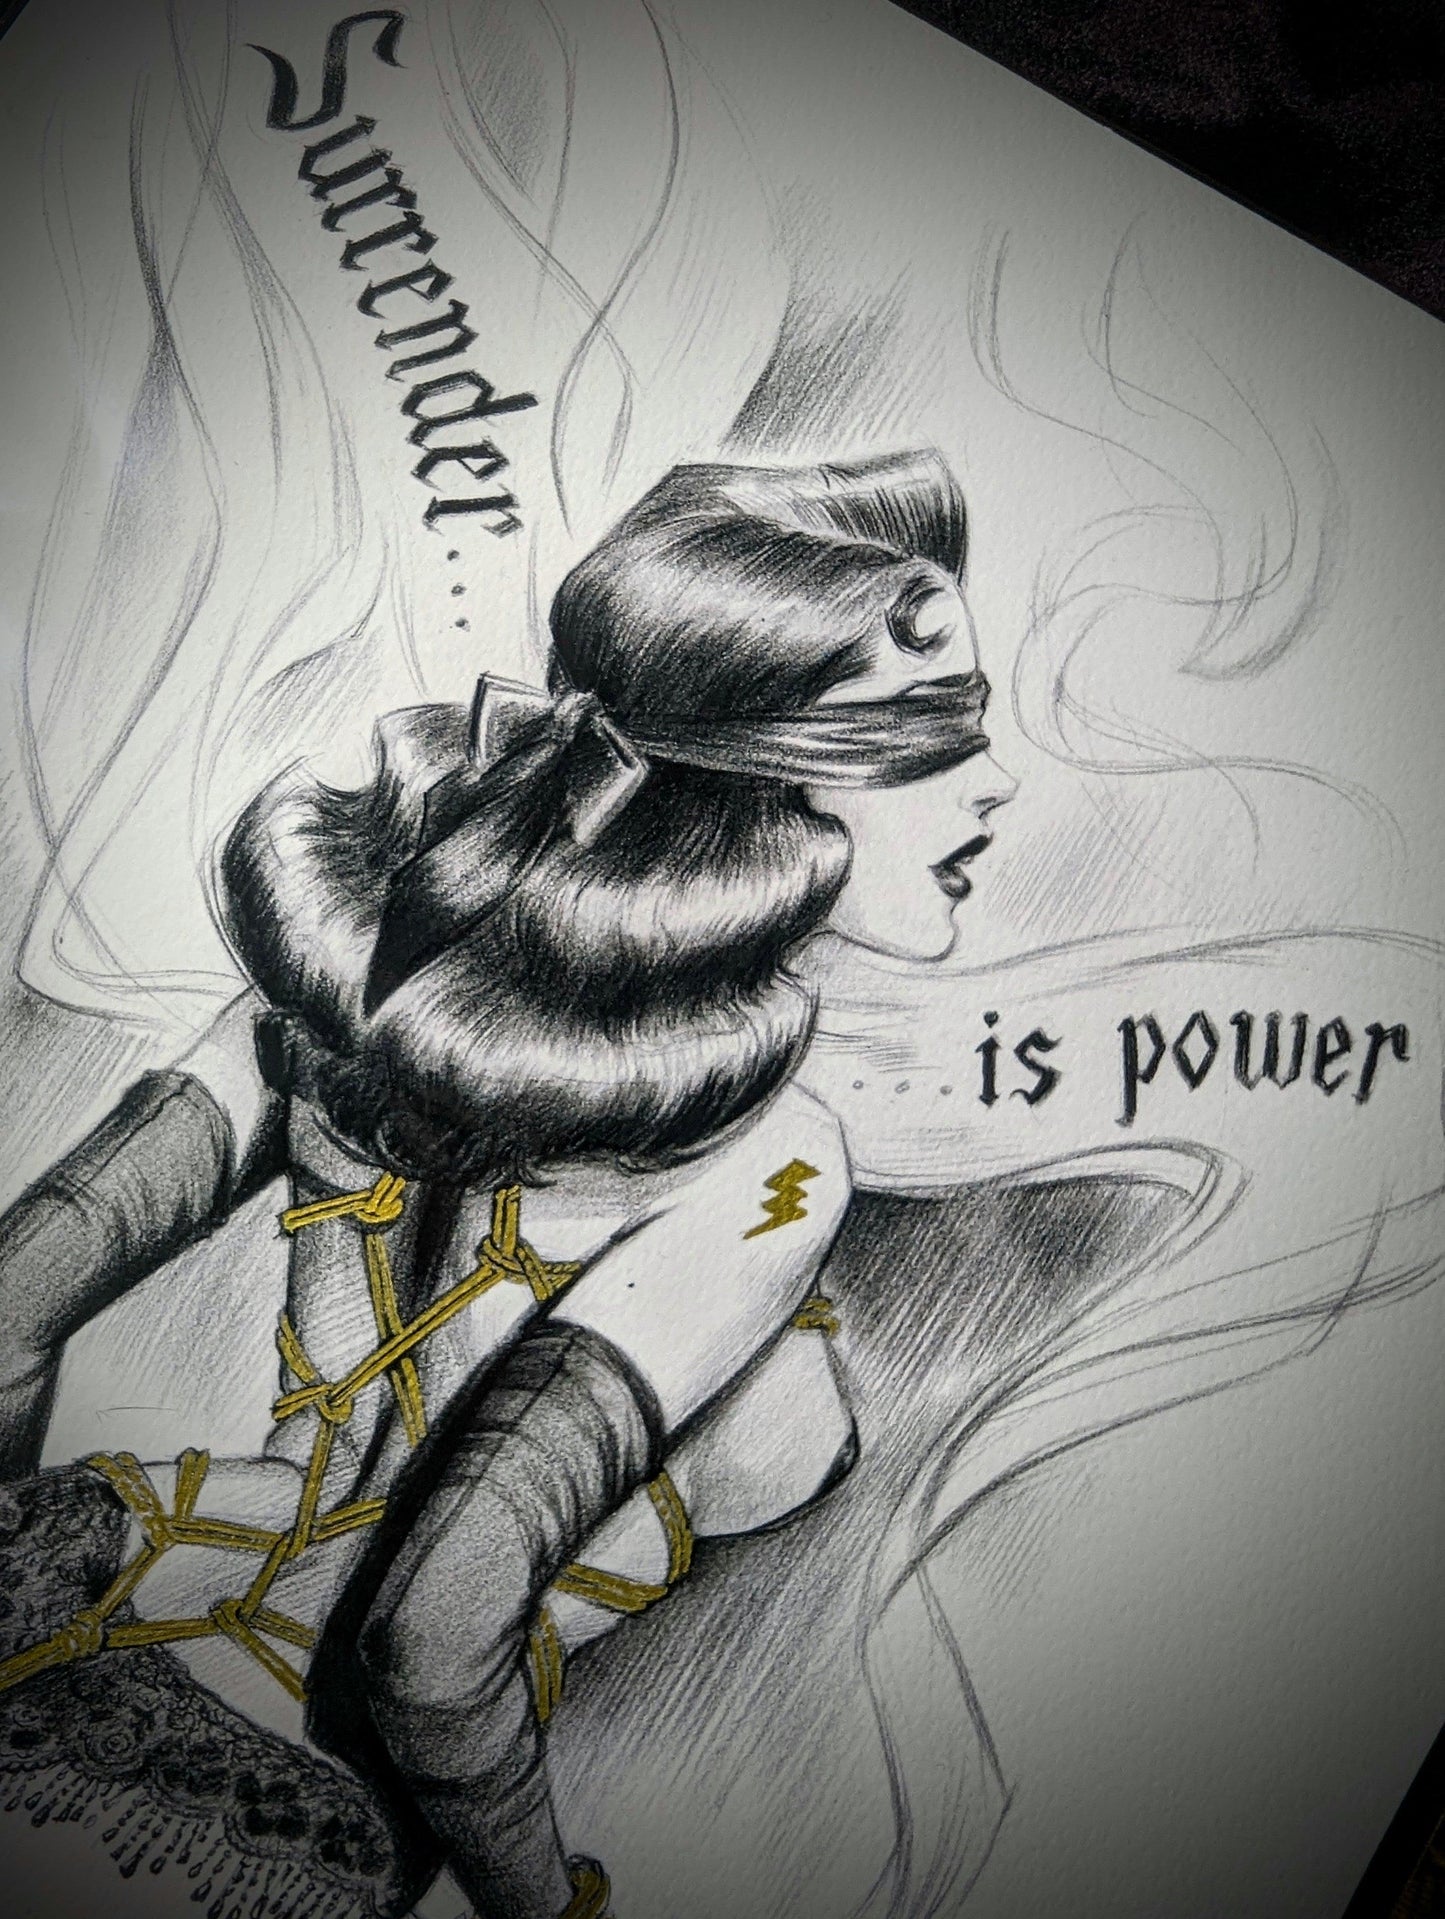 Embellished print, numbered and signed "Surrender is Power"